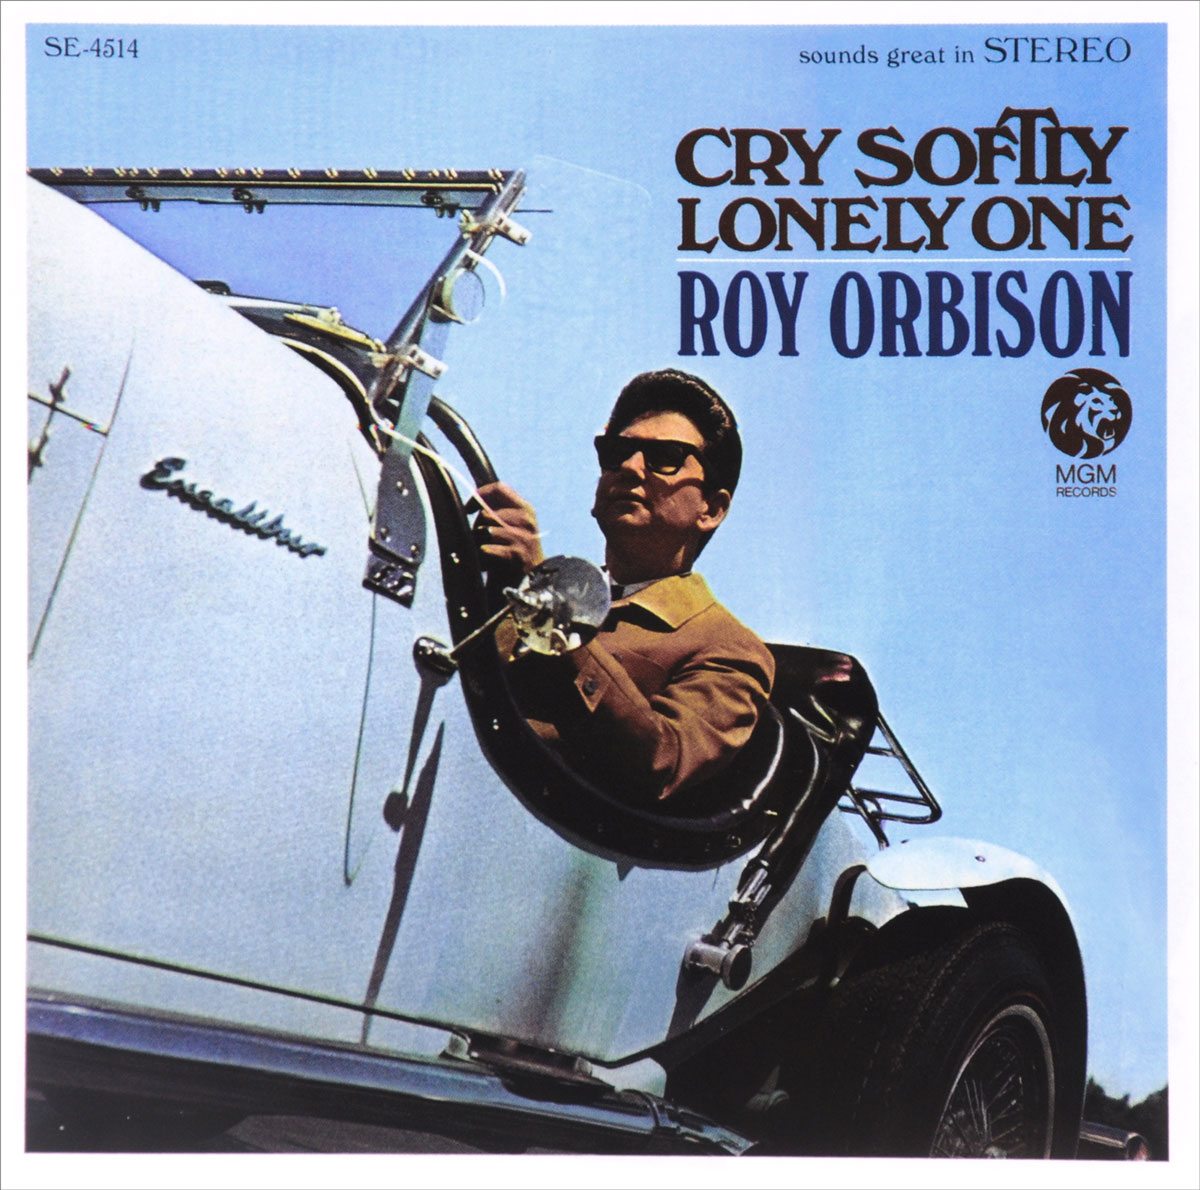 Roy Orbison. Cry Softly Lonely One